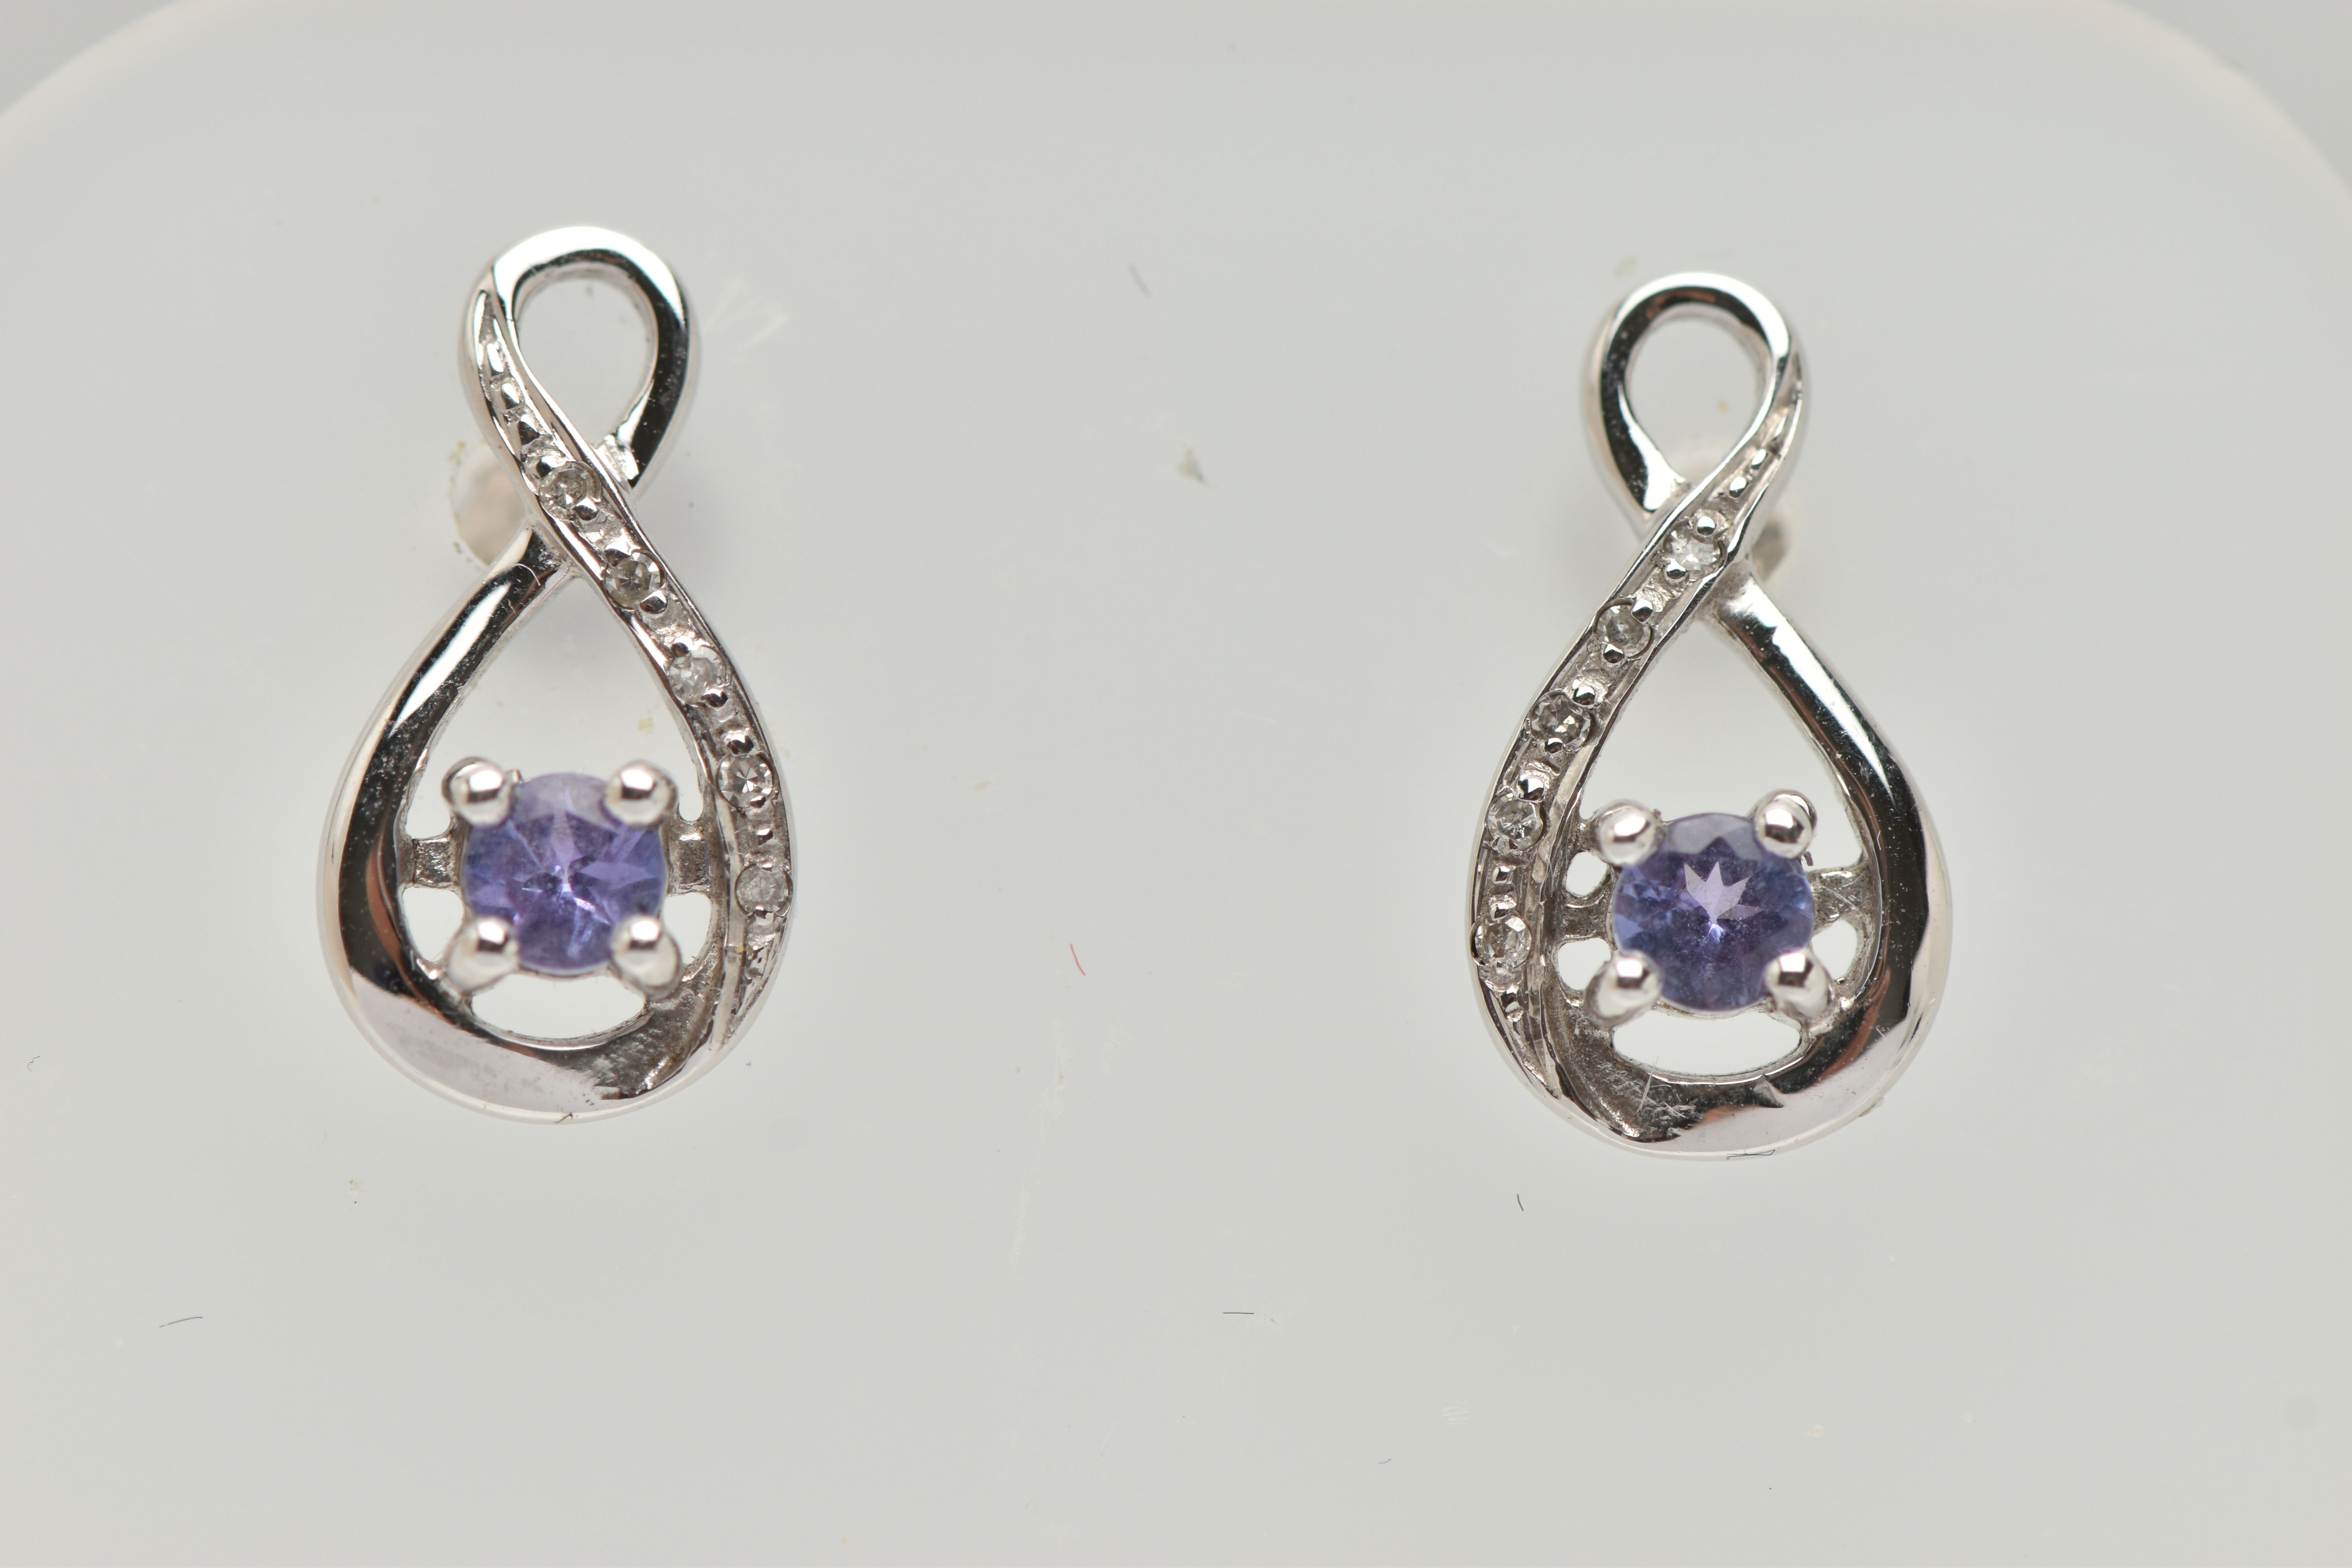 A BOXED PAIR OF 9CT WHITE GOLD TANZANITE AND DIAMOND SET EARRINGS, each earring set with a small - Image 2 of 3